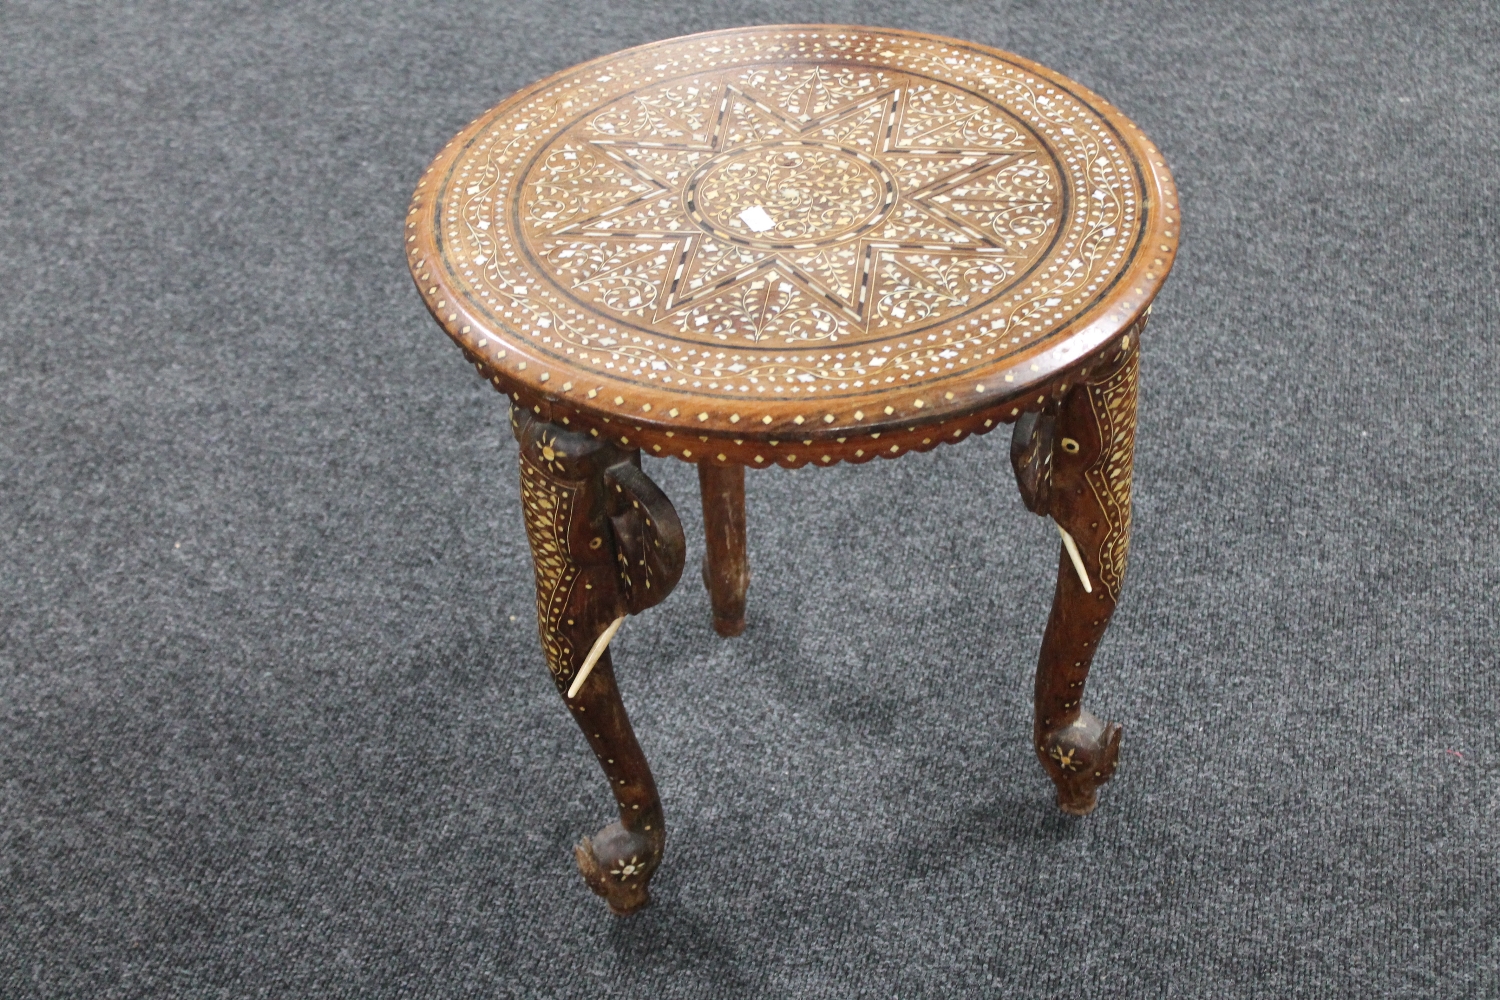 An early 20th century inlaid eastern occasional table